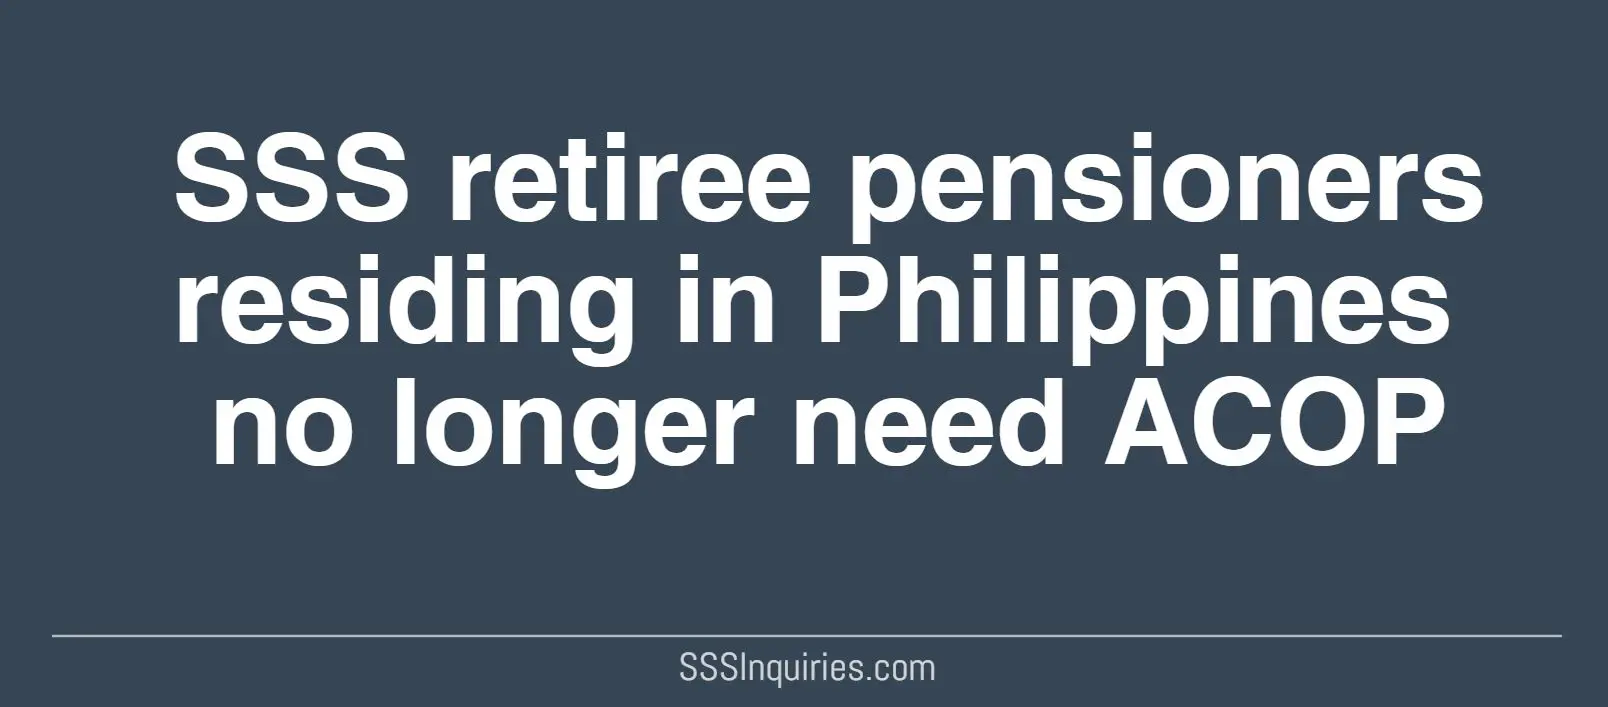 SSS retiree Pensioners residing in PH no longer need ACOP